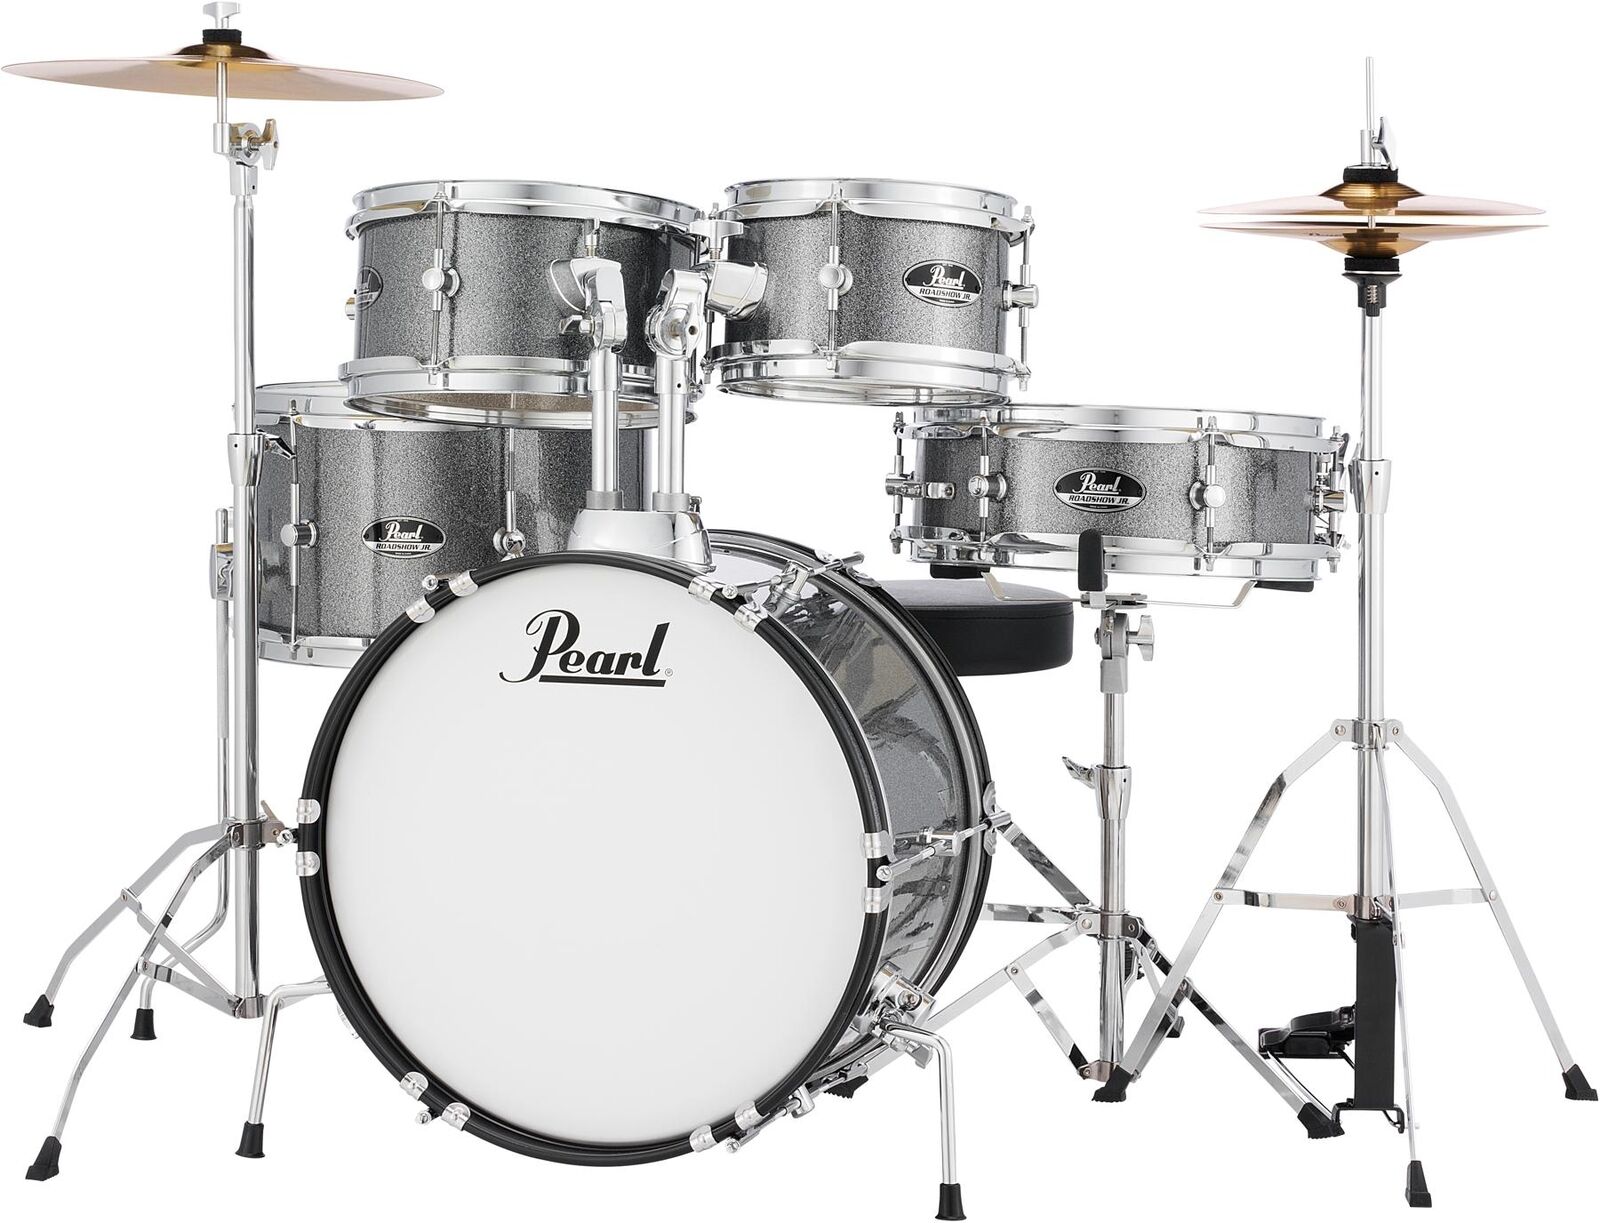 Pearl Roadshow Jr. 5-piece Complete Drum Set with Cymbals – Grindstone Sparkle 1